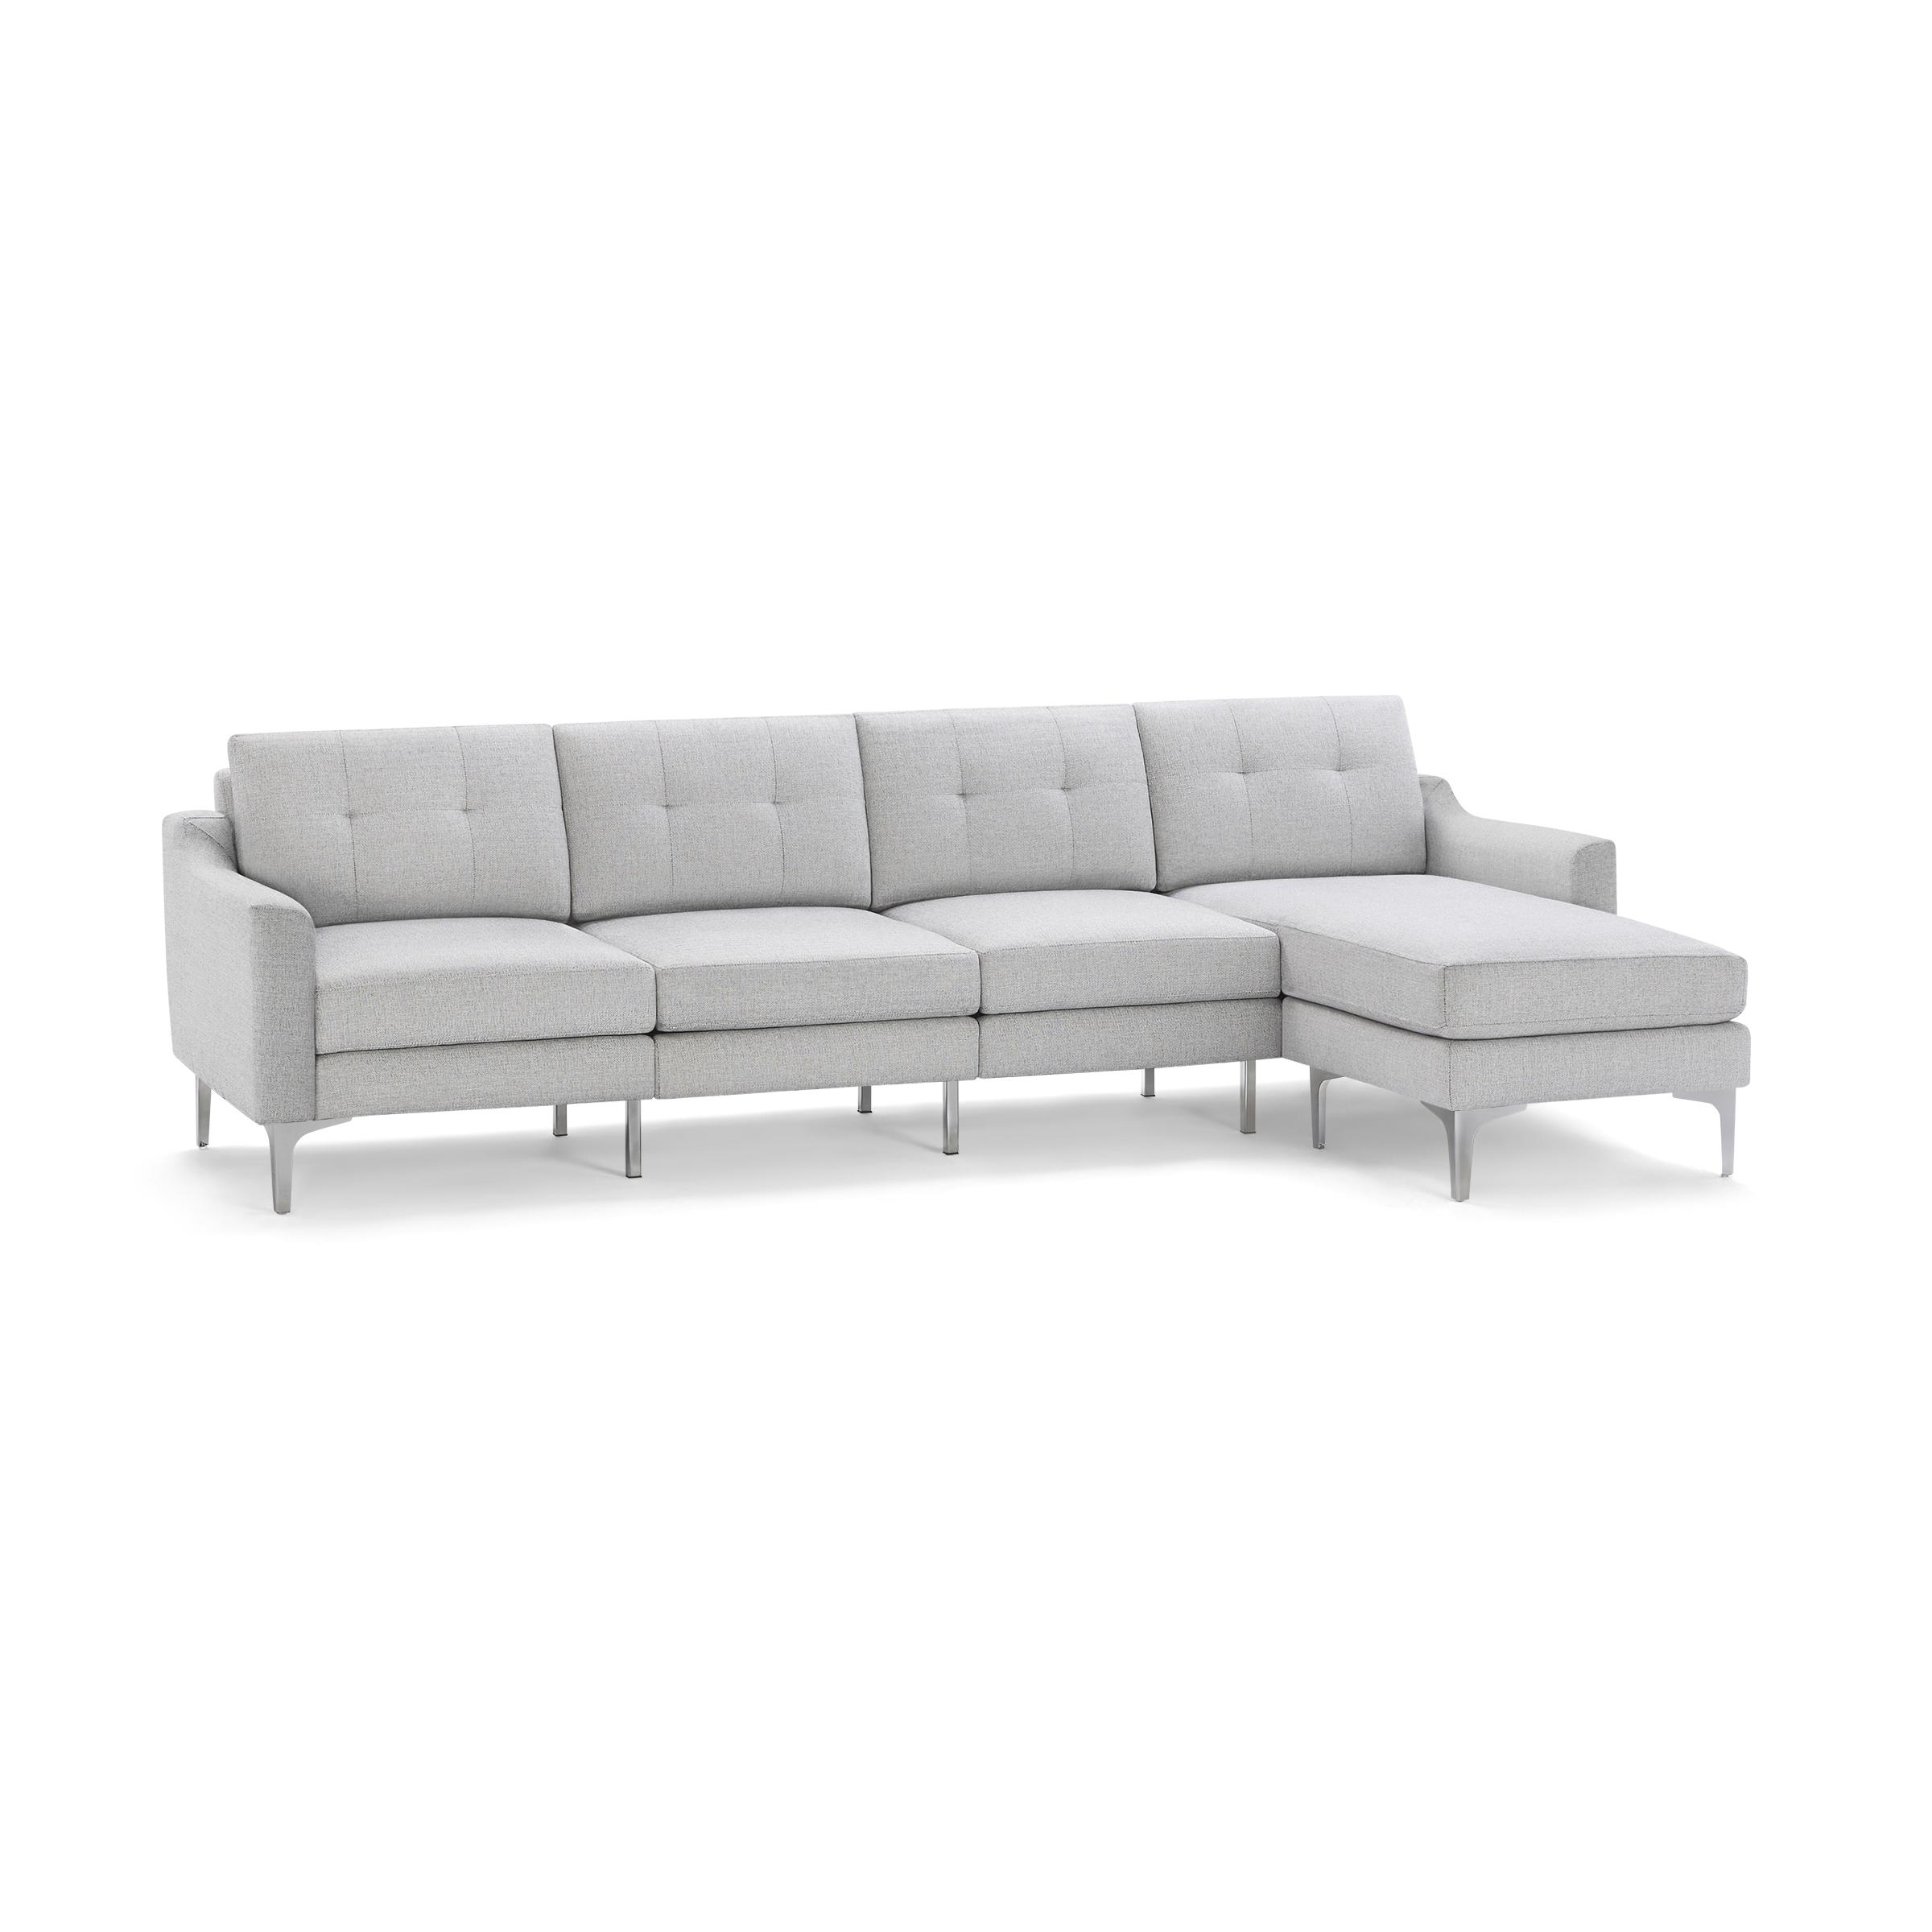 Nomad King Sectional in Crushed Gravel - Image 0